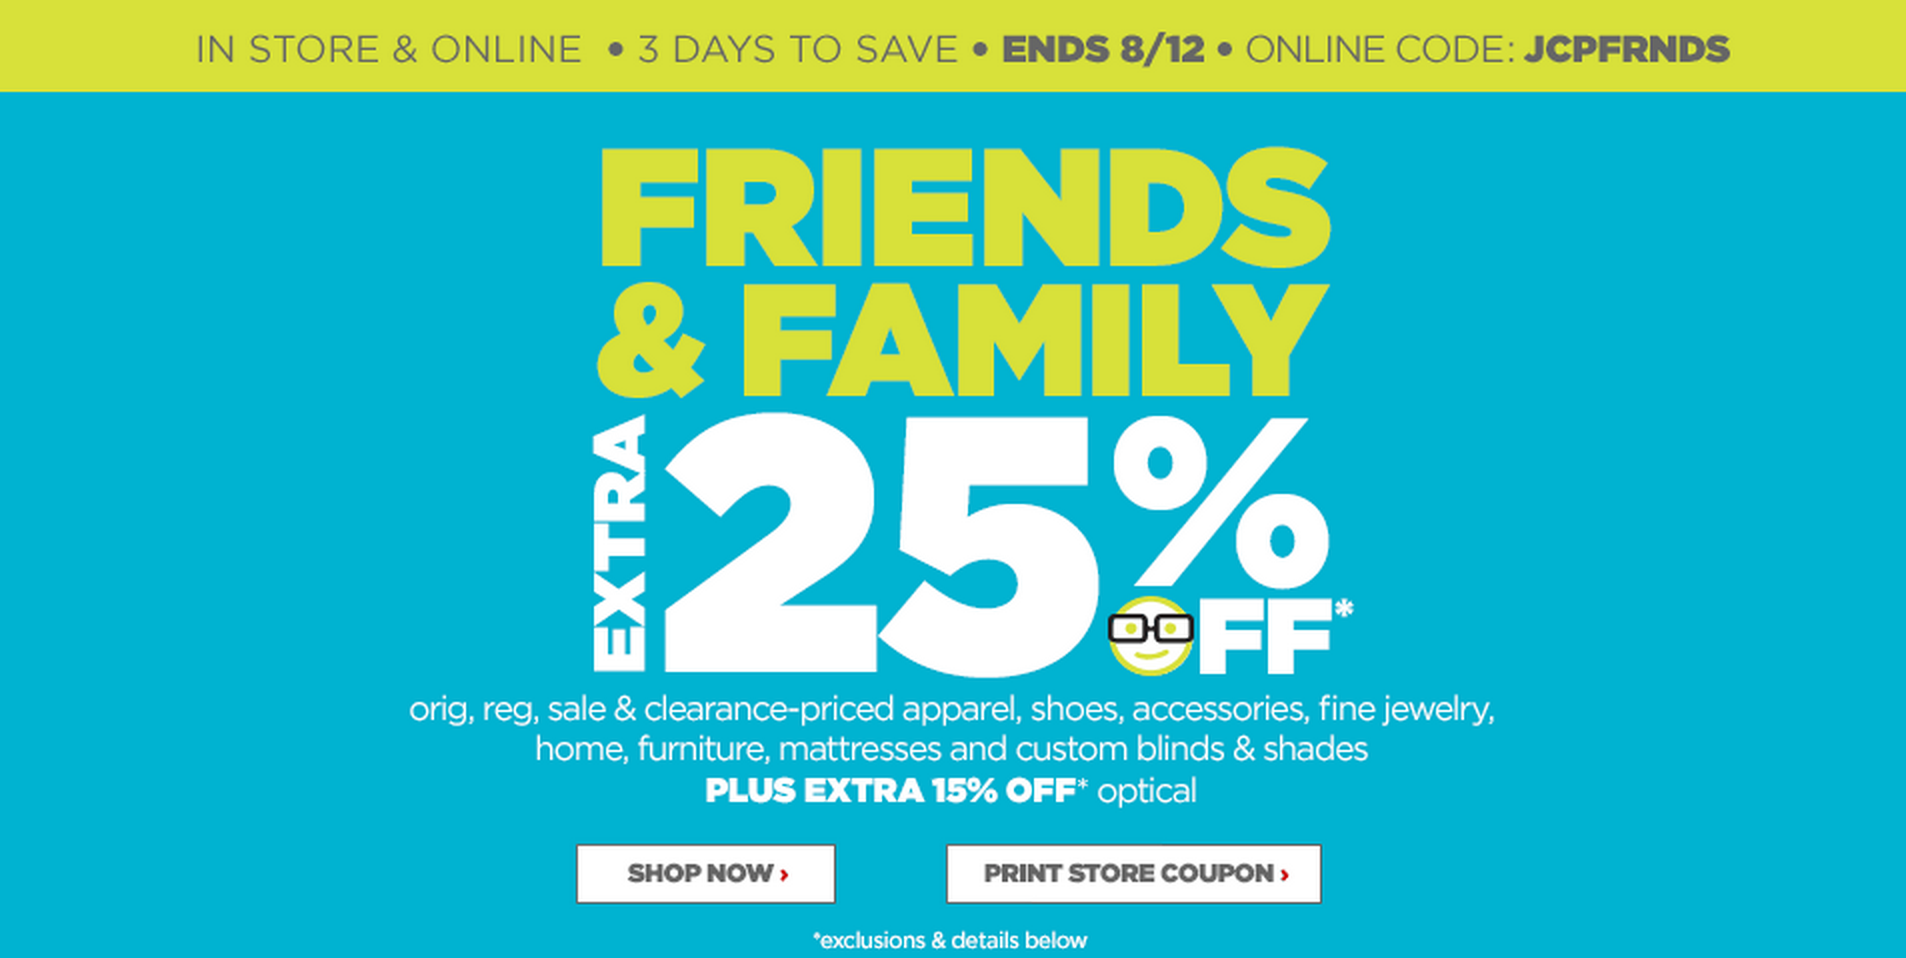 JCPenney: Get FREE Shipping on All Orders w/ Promo Code (Today Only)